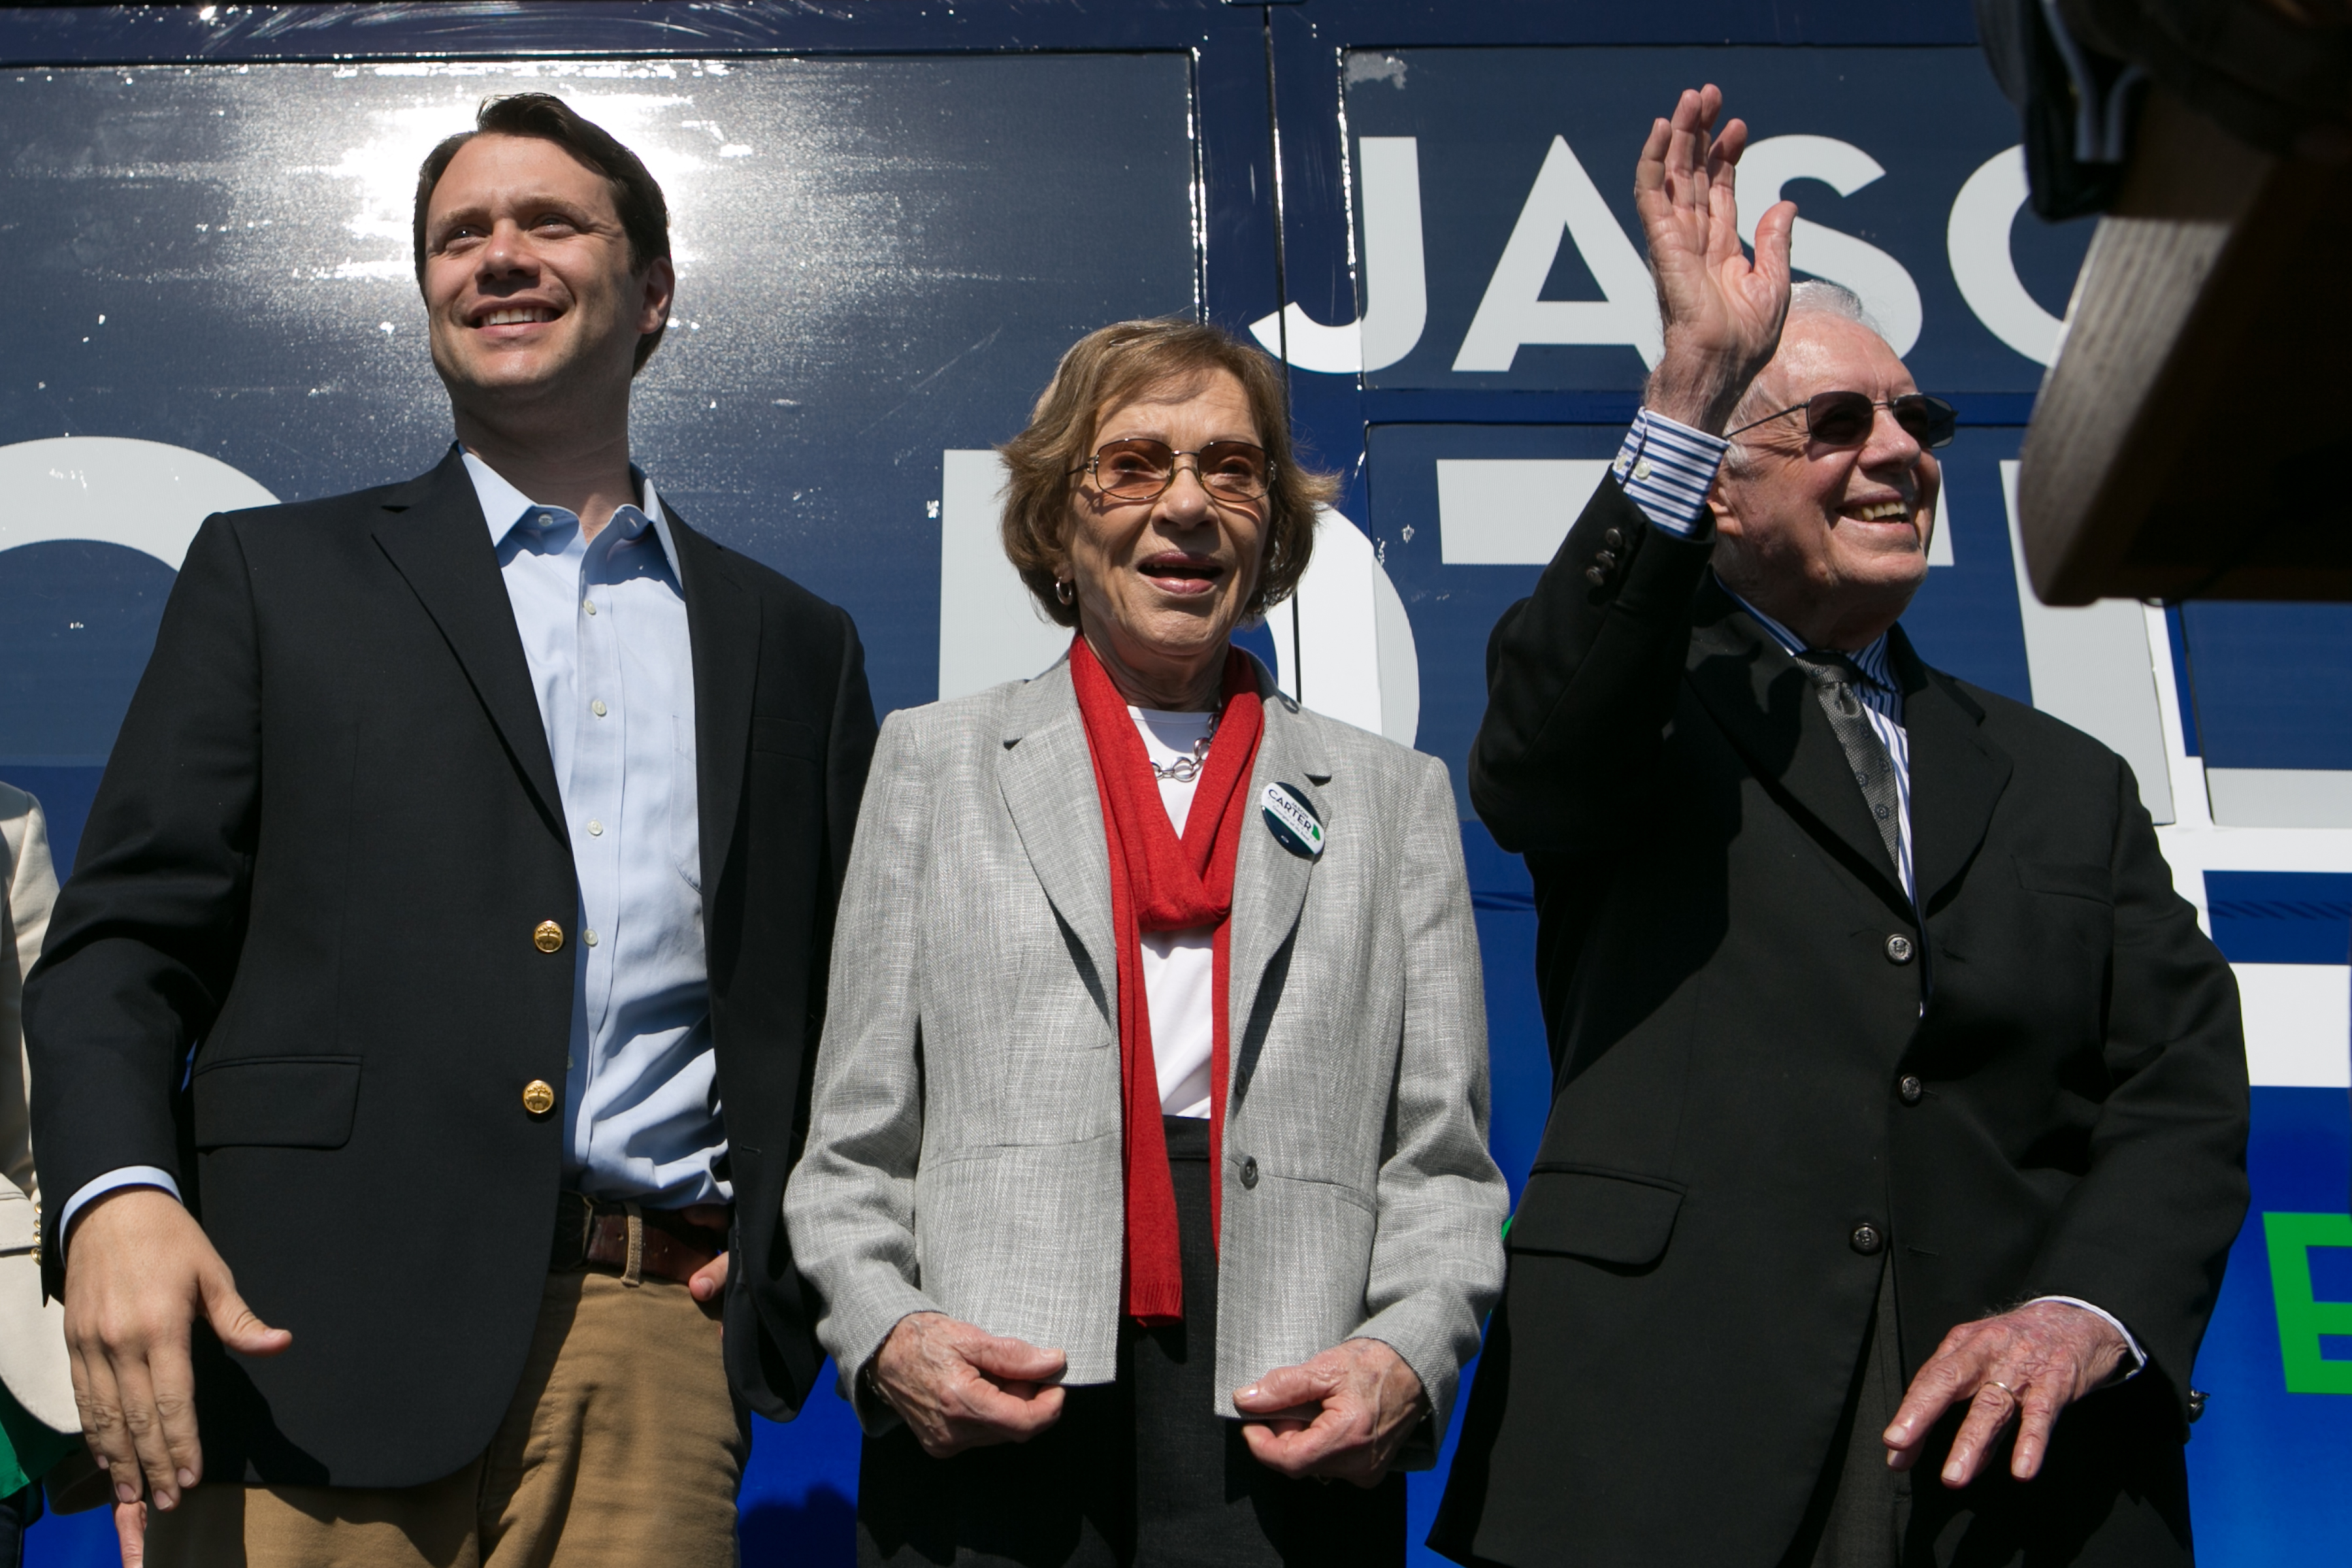 Jason Carter, his grandparents former first lady Rosalynn Carter and former U.S. President Jimmy Carter at Emmanuel Christian Community Church on October 27, 2014, in Columbus, Georgia. | Source: Getty Images